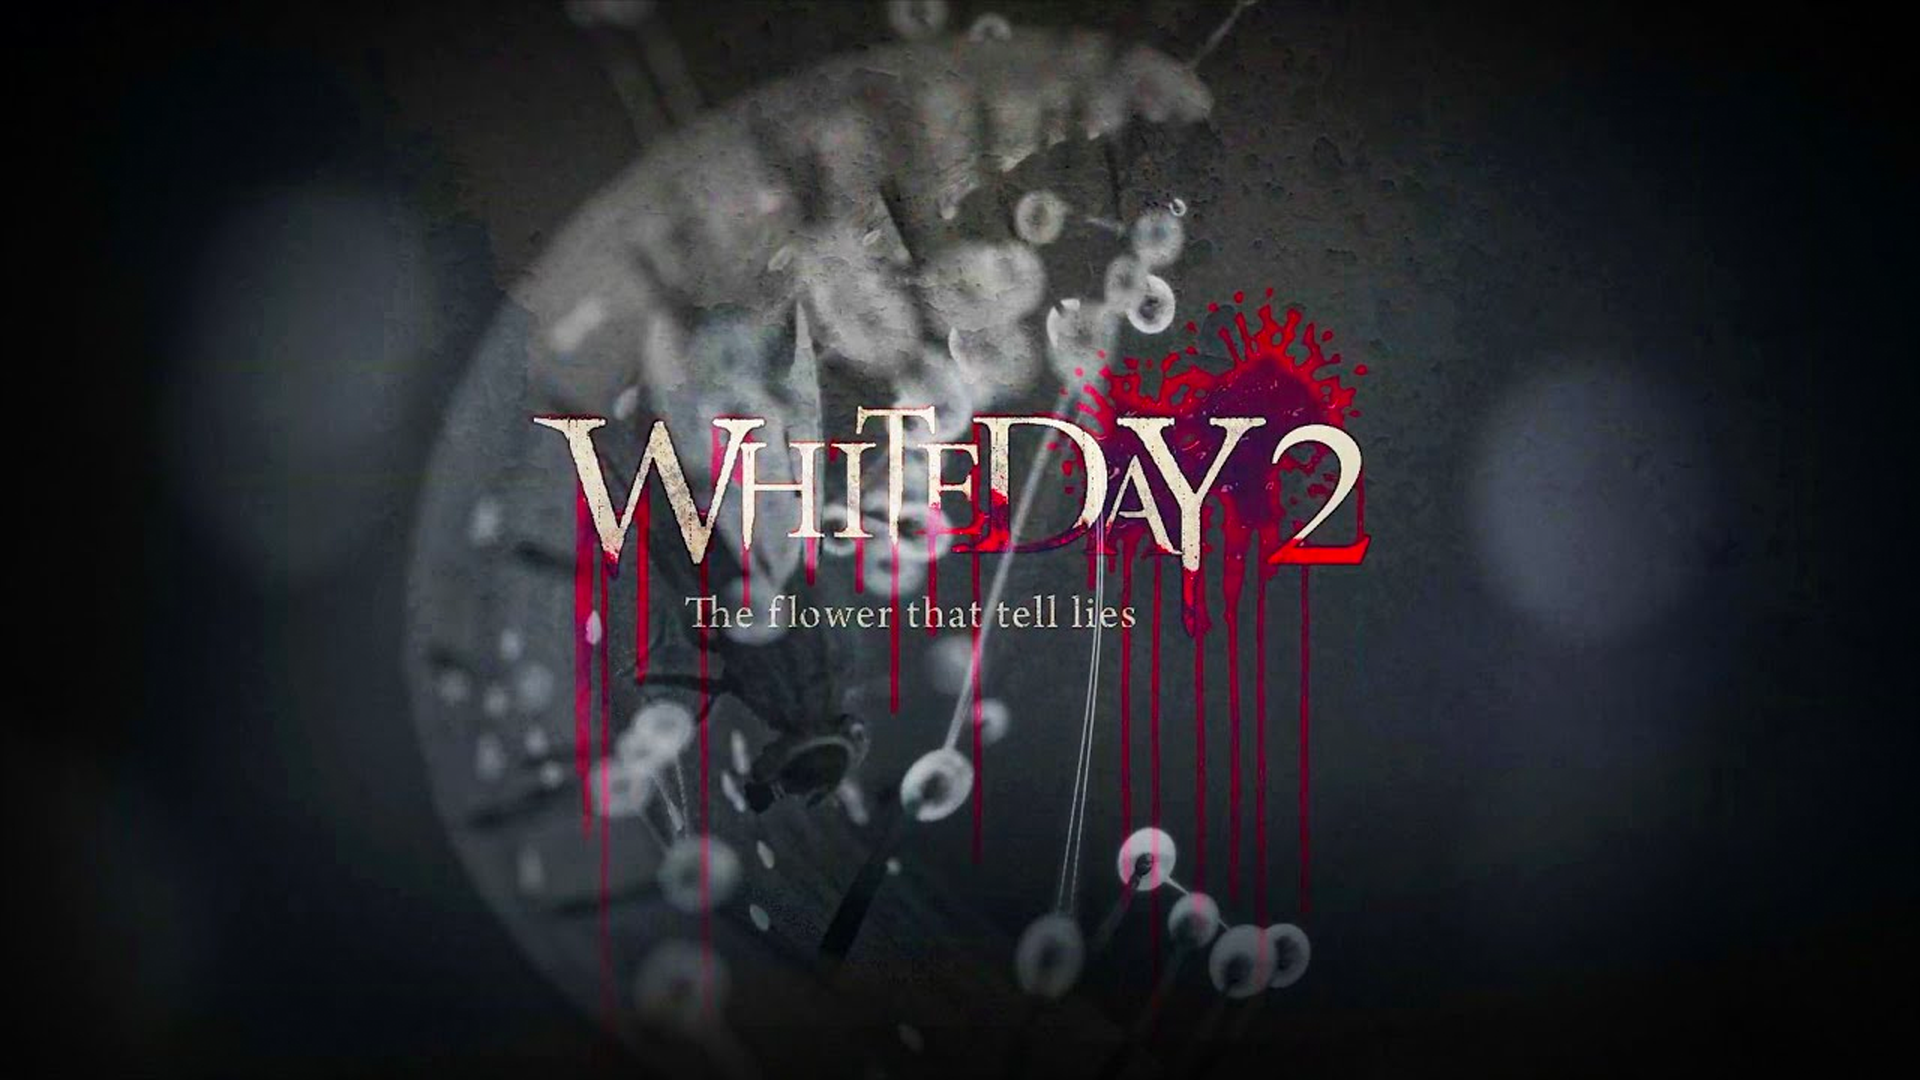 white day 2 the flower that tells lies download